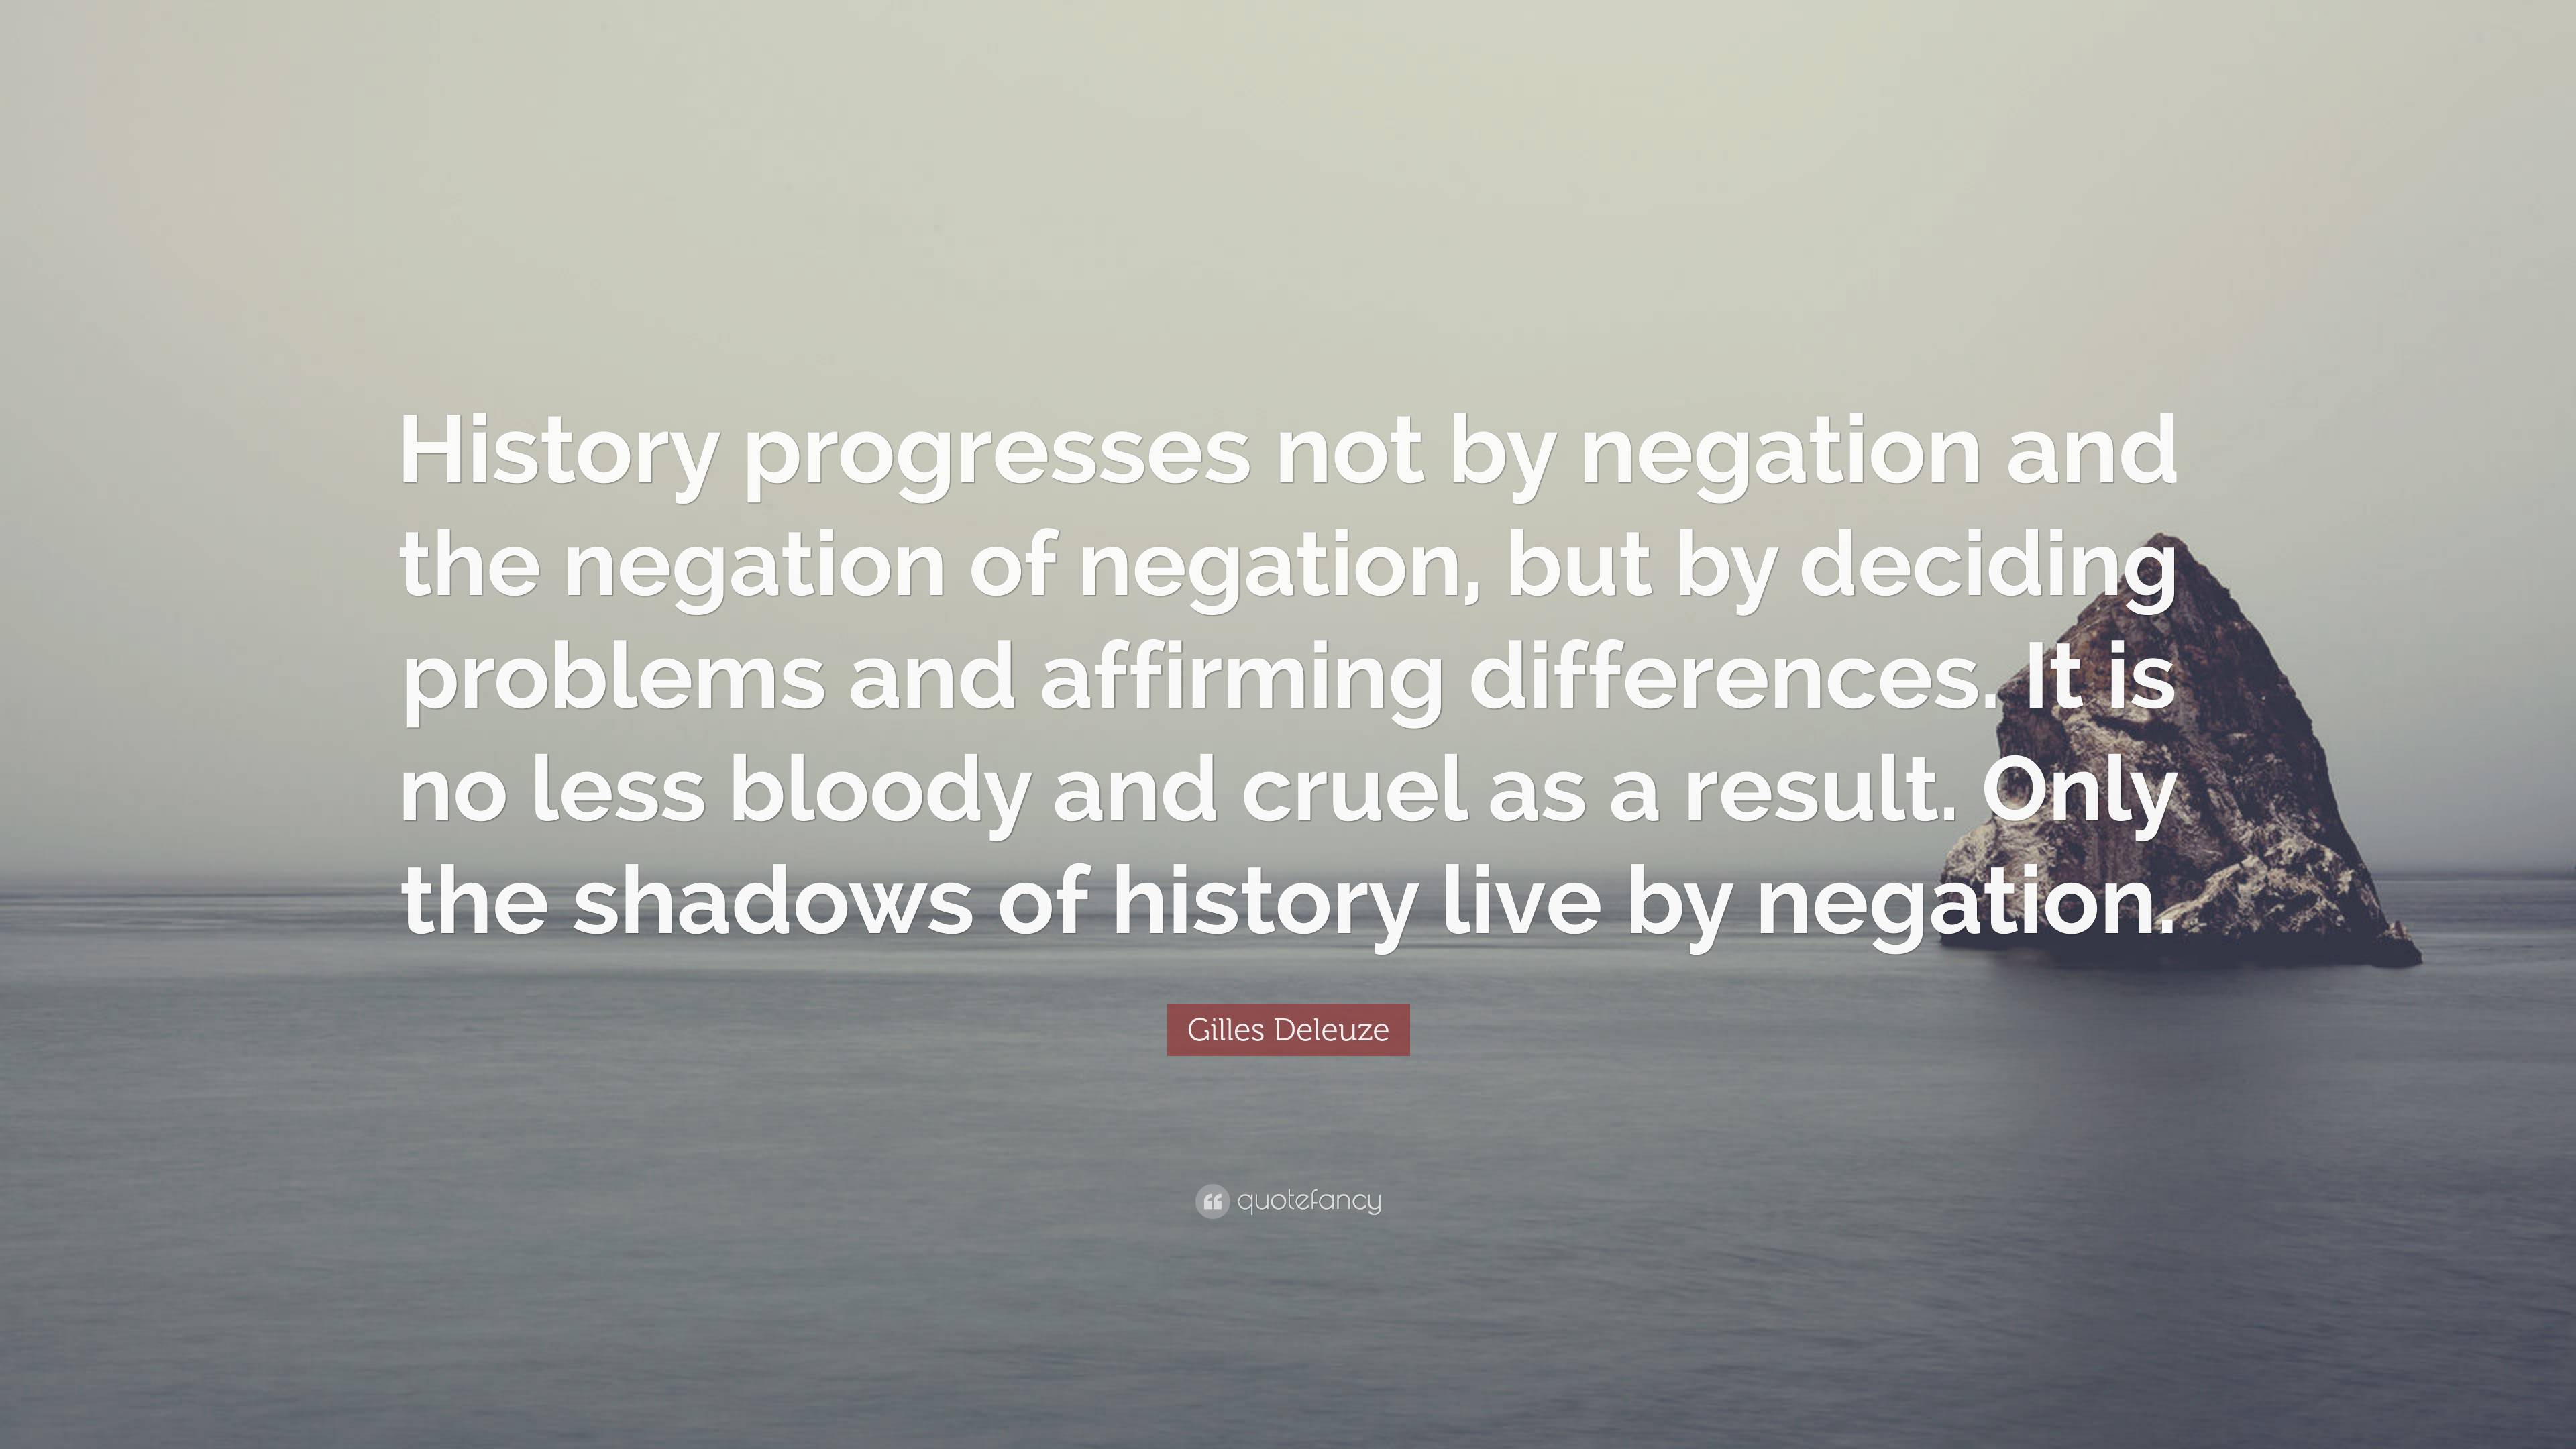 Gilles Deleuze Quote: “History progresses not by negation and the ...